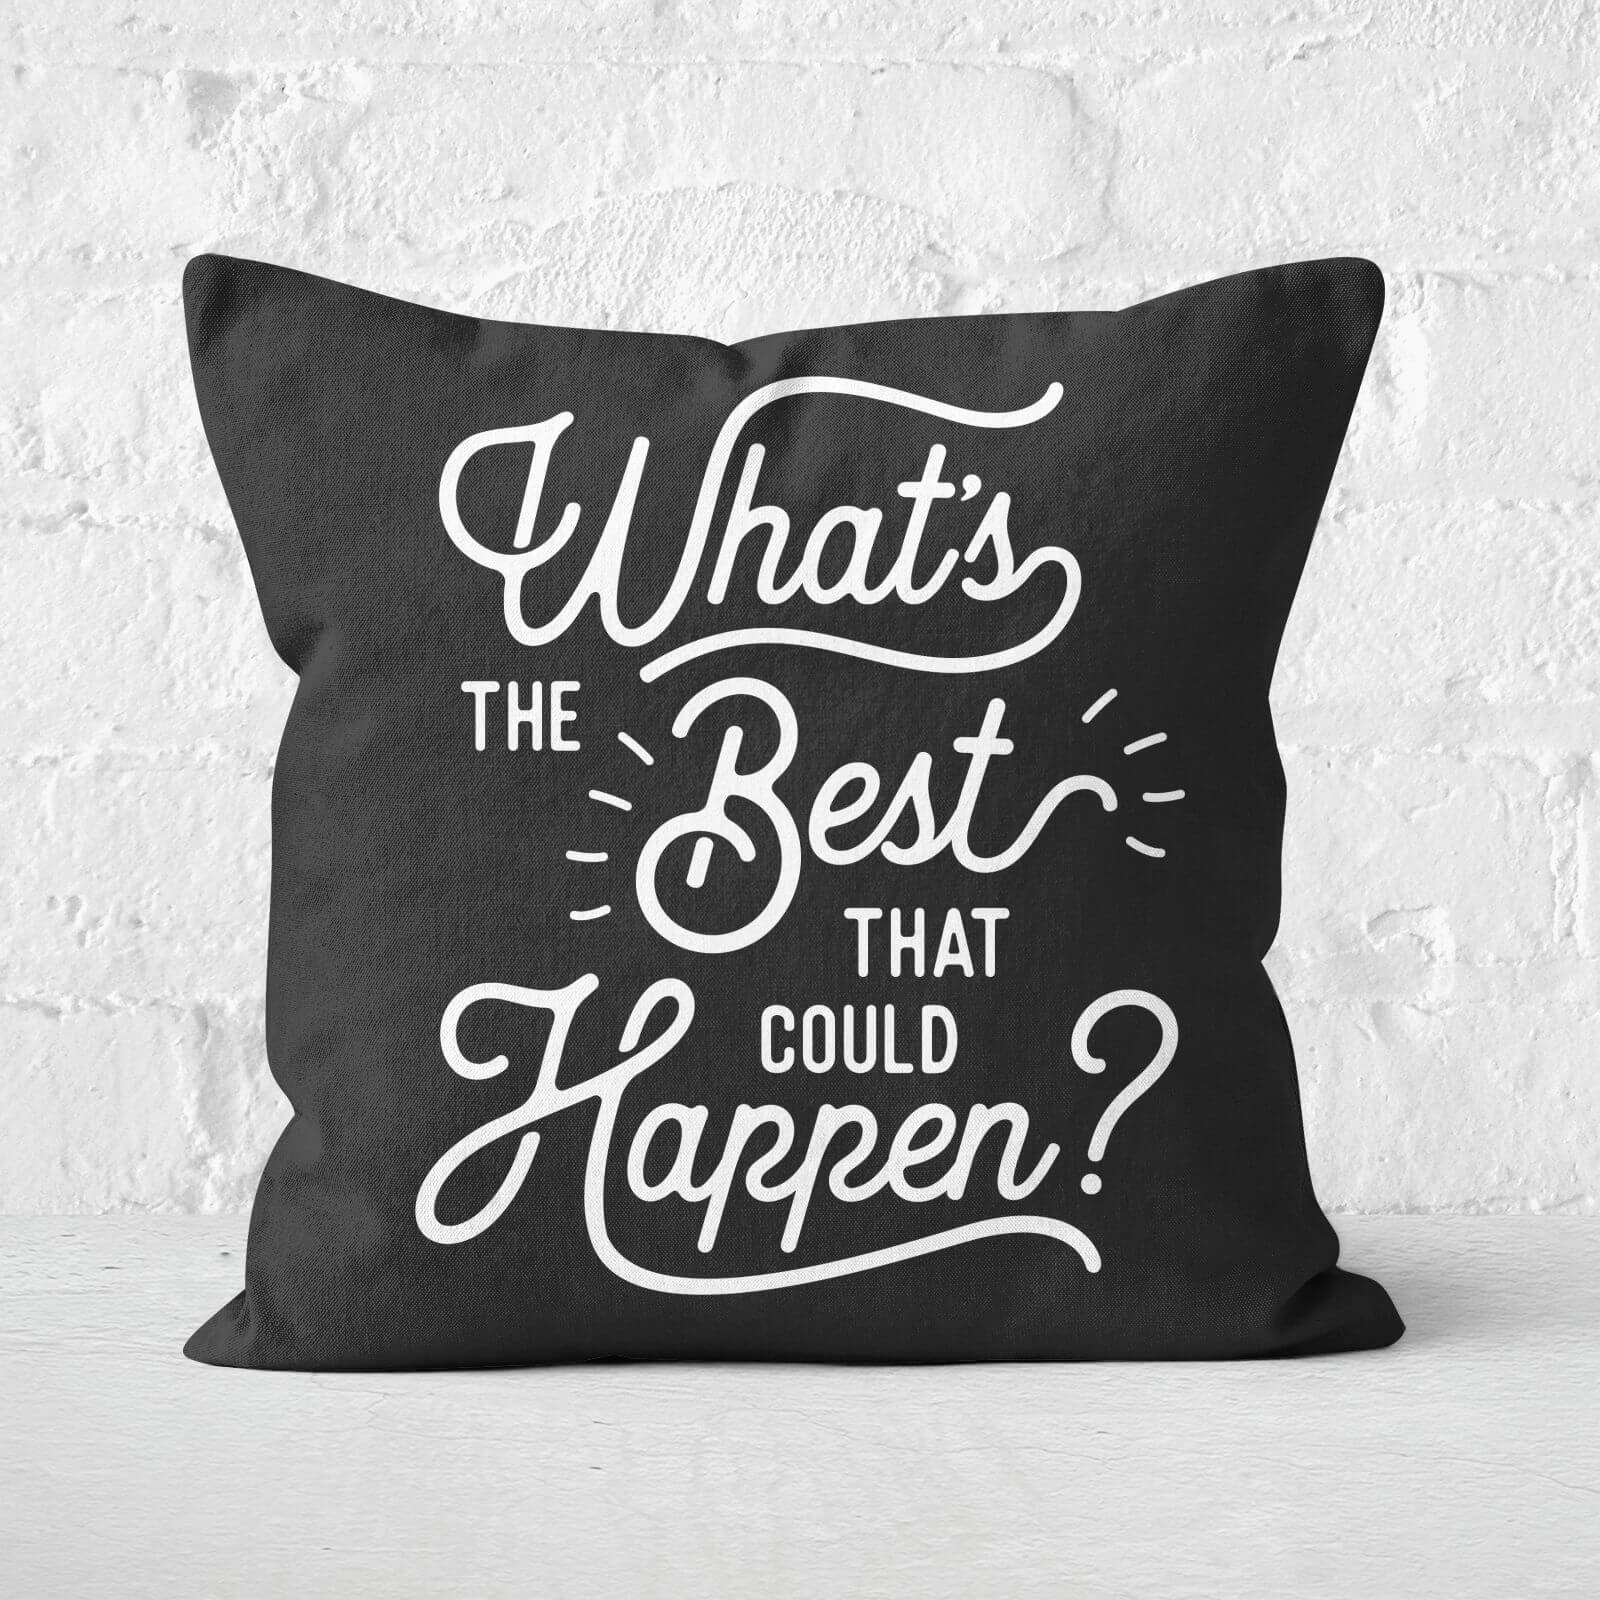 The Motivated Type What's The Best That Could Happen? Square Cushion - 60x60cm - Soft Touch